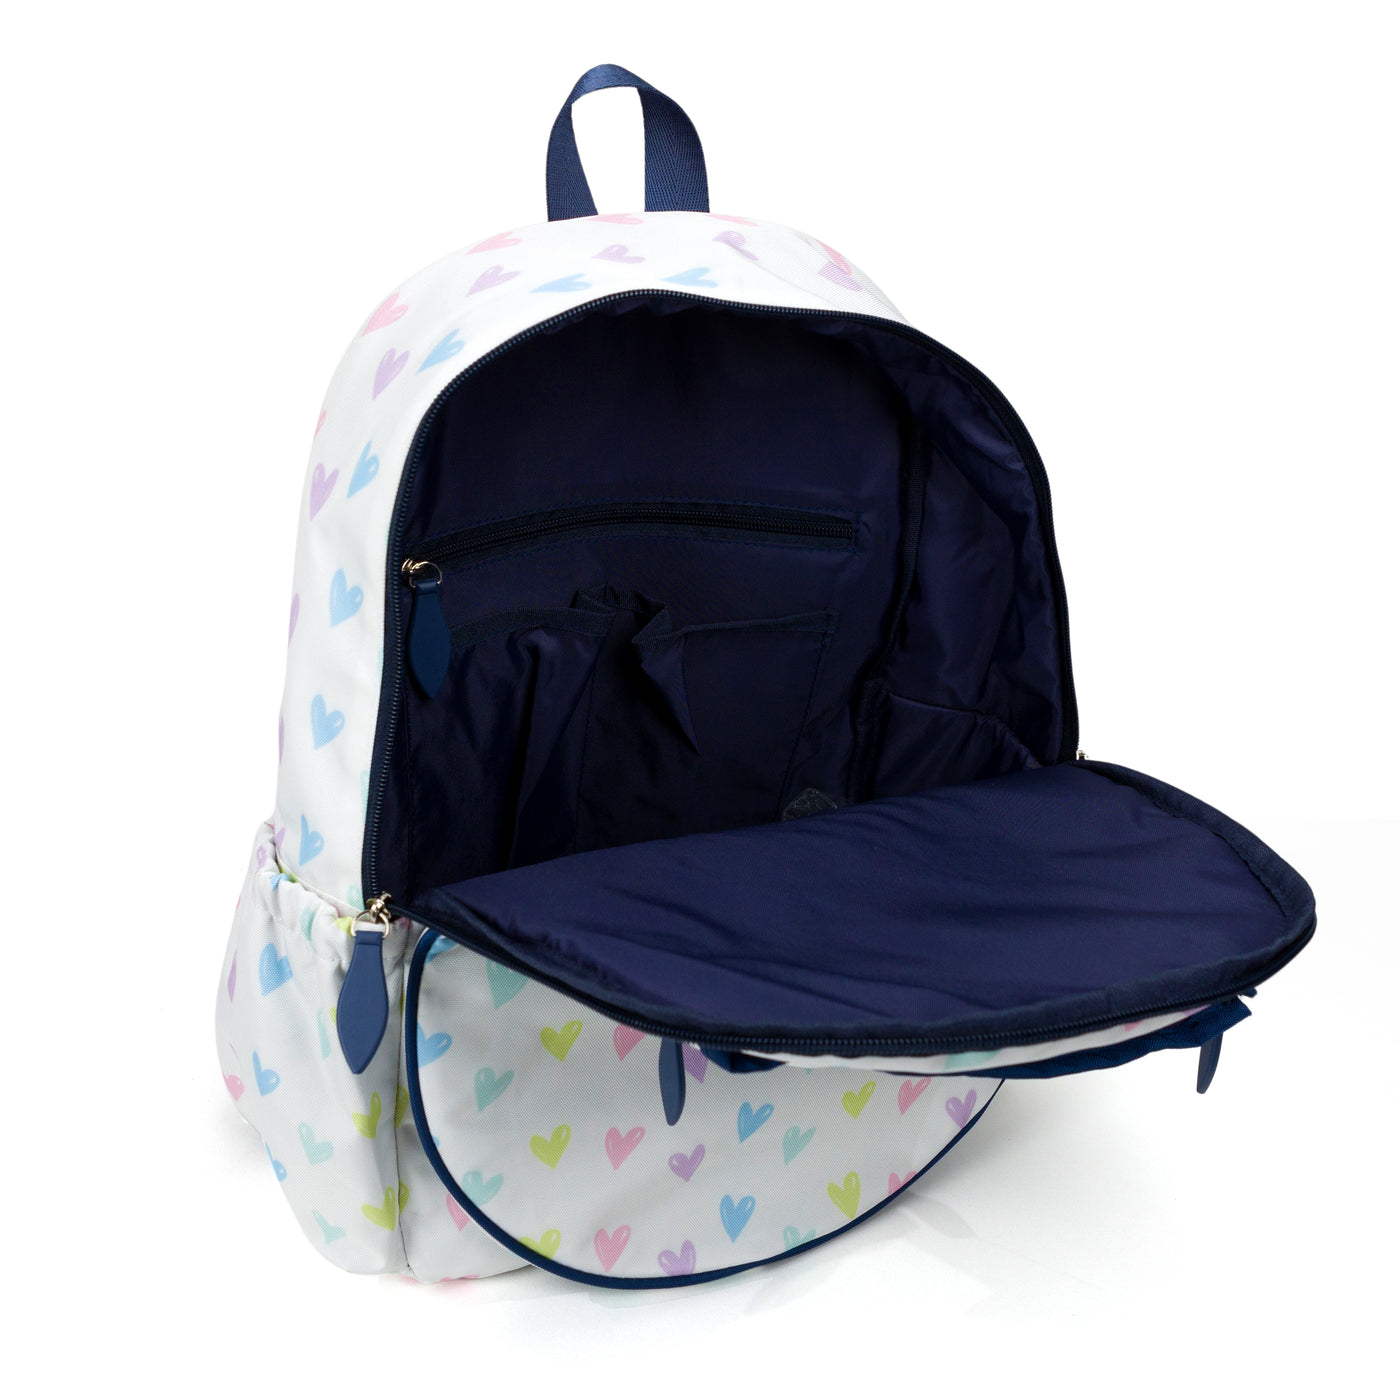 white kids tennis backpack with repeating pattern of rainbow hand drawn hearts.